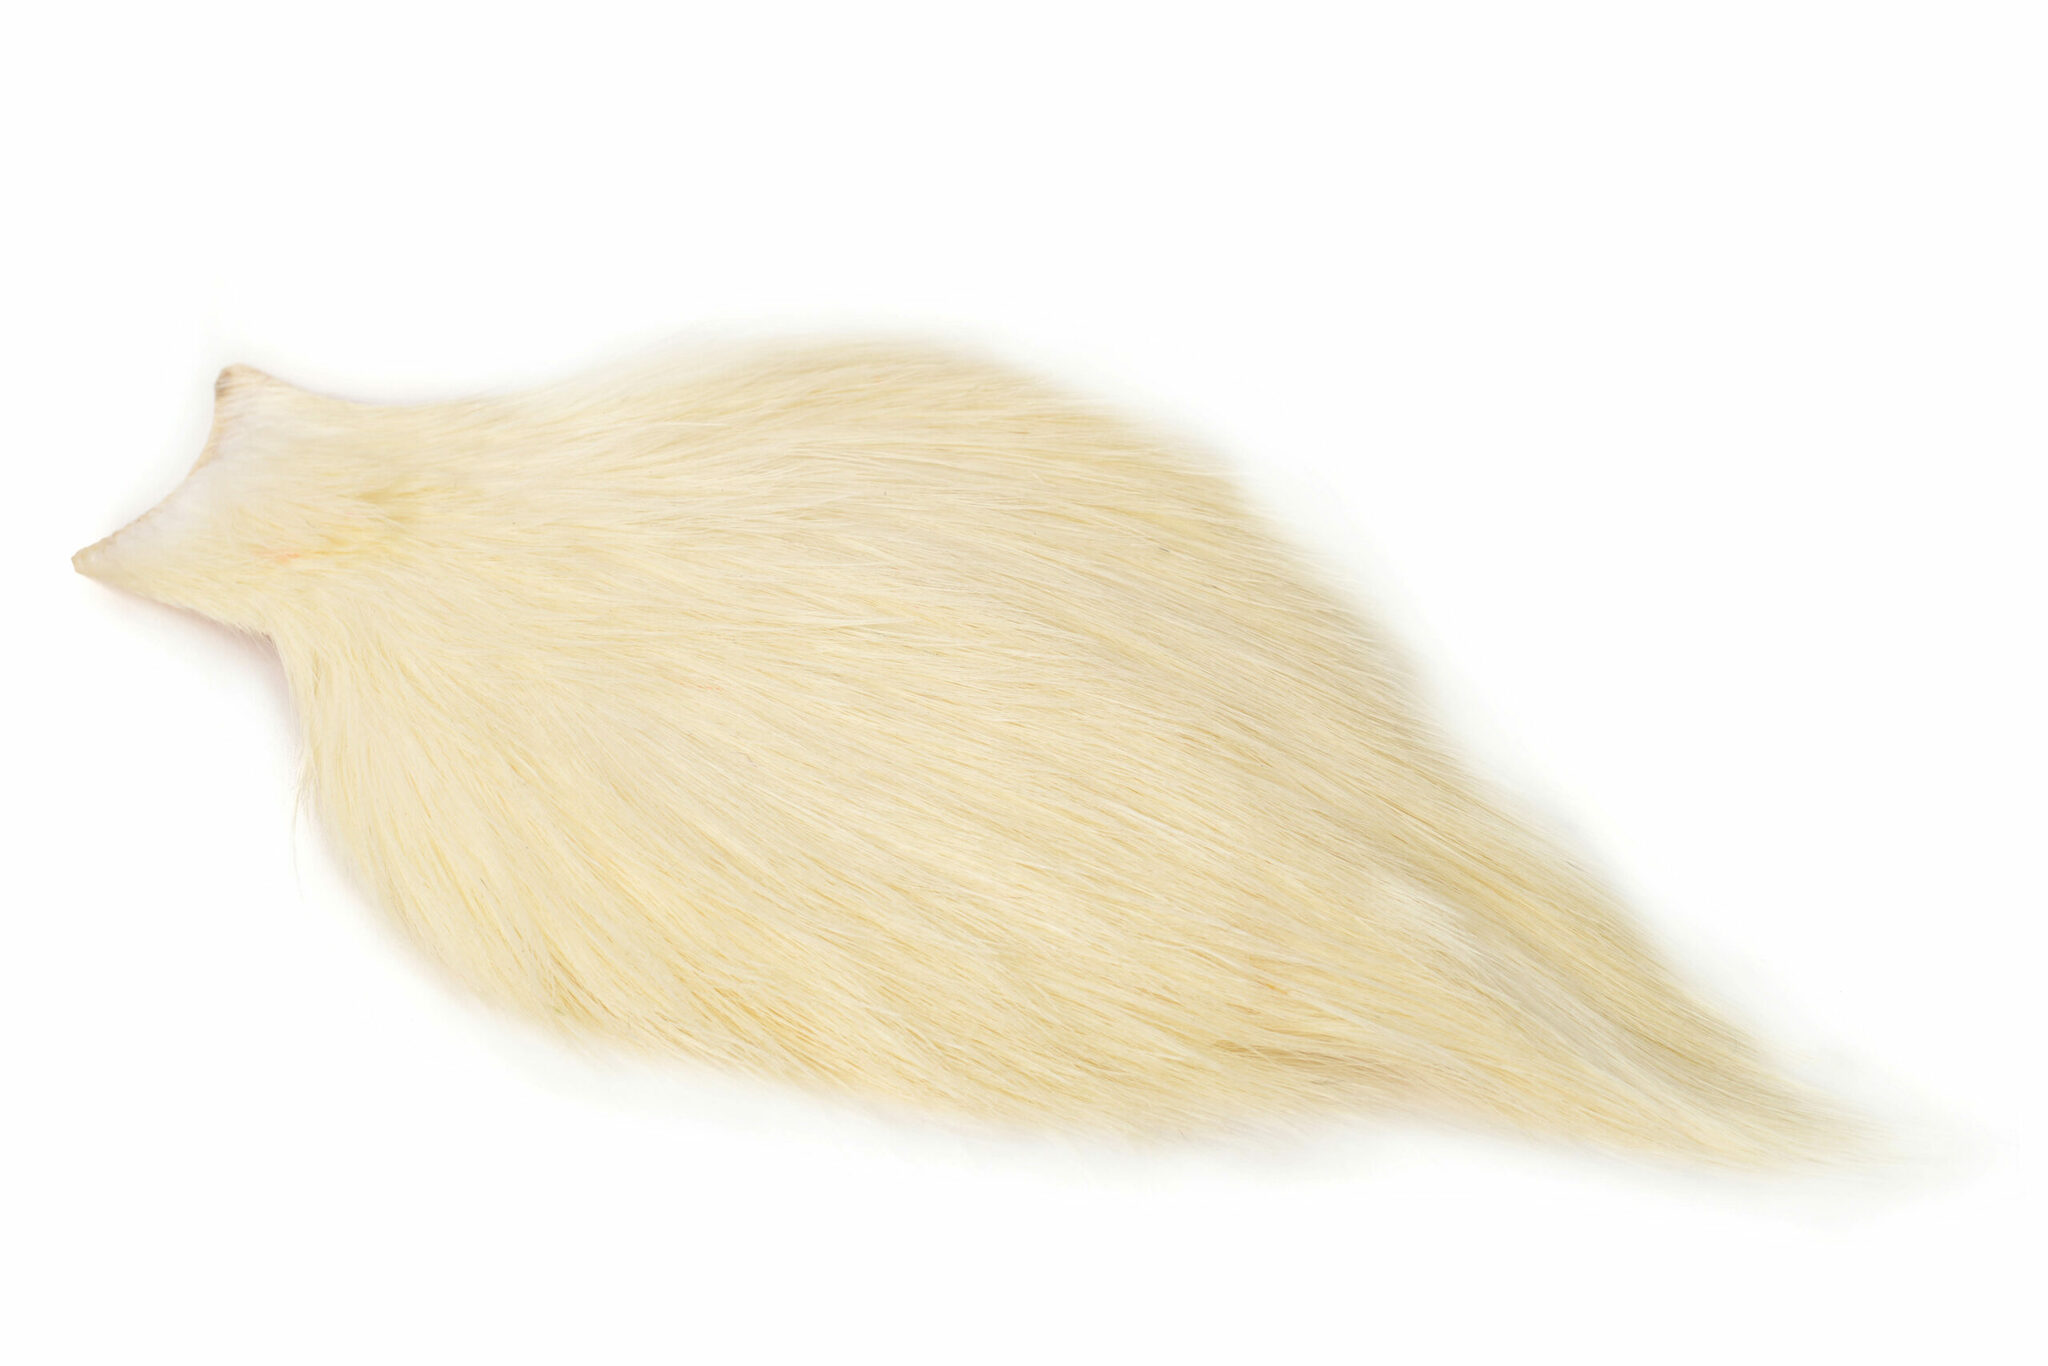 Whiting Spey Hackle Cape Bronze- White